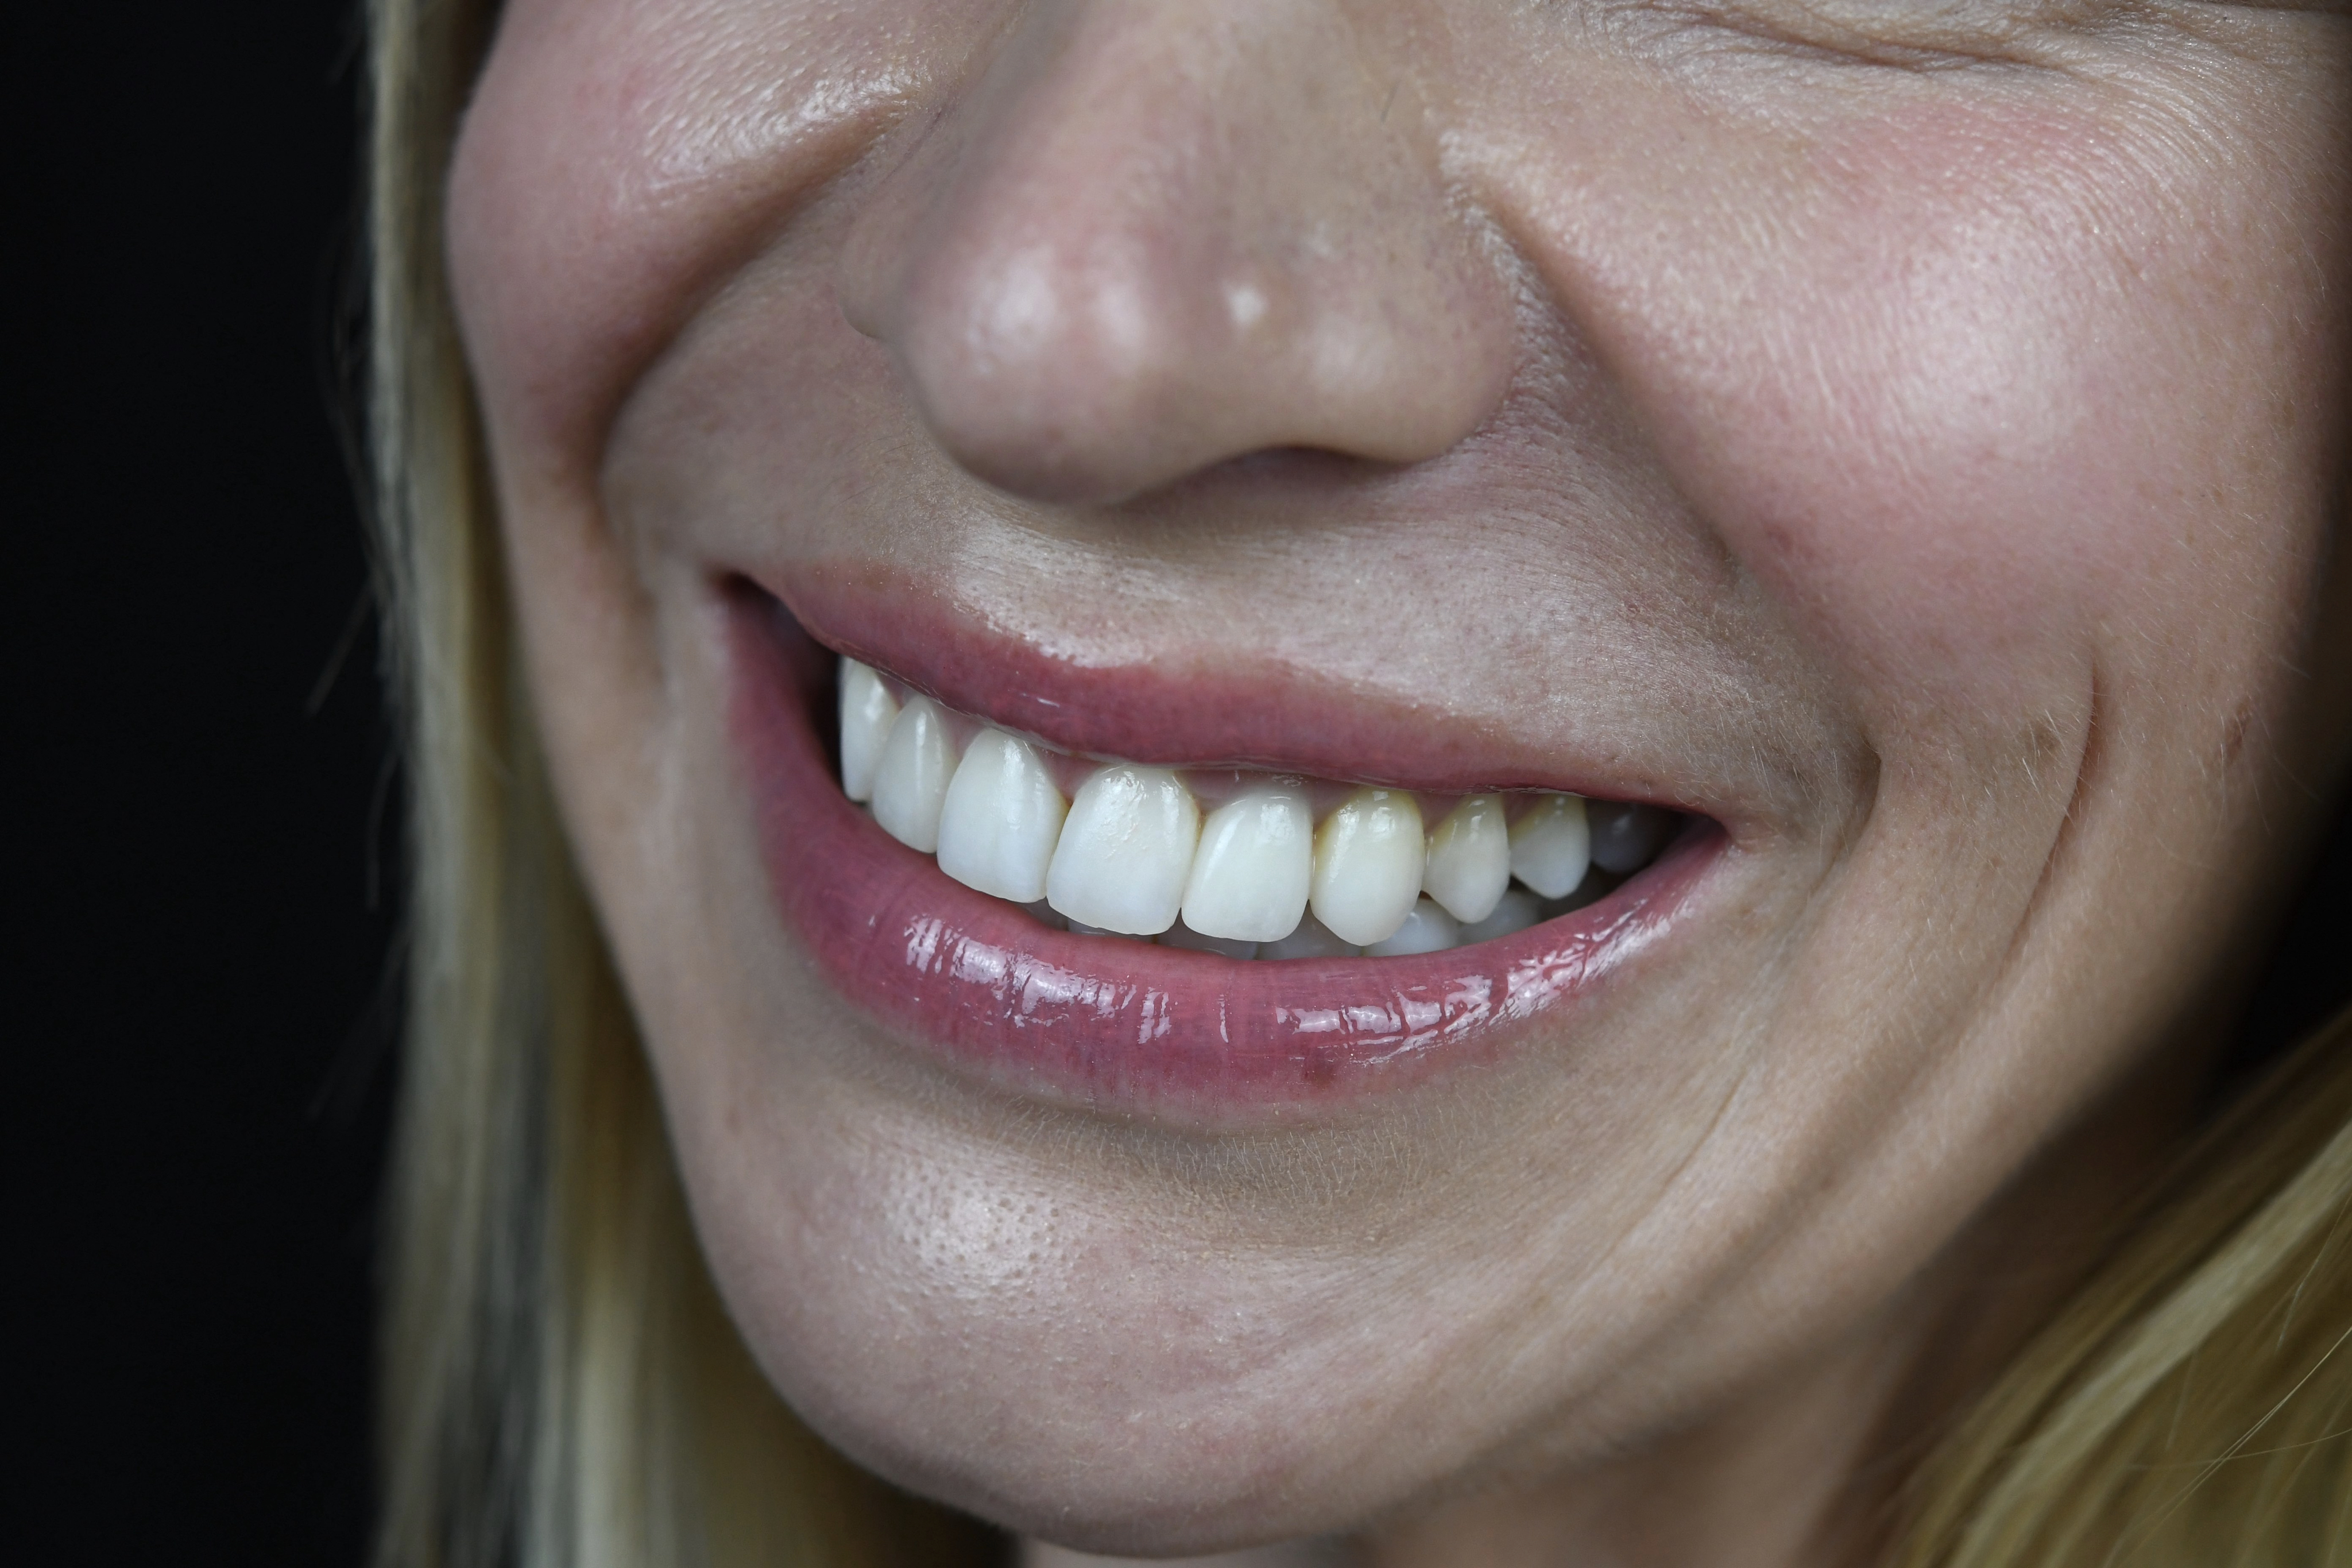 Fig. 14: Final smile close-up photograph.